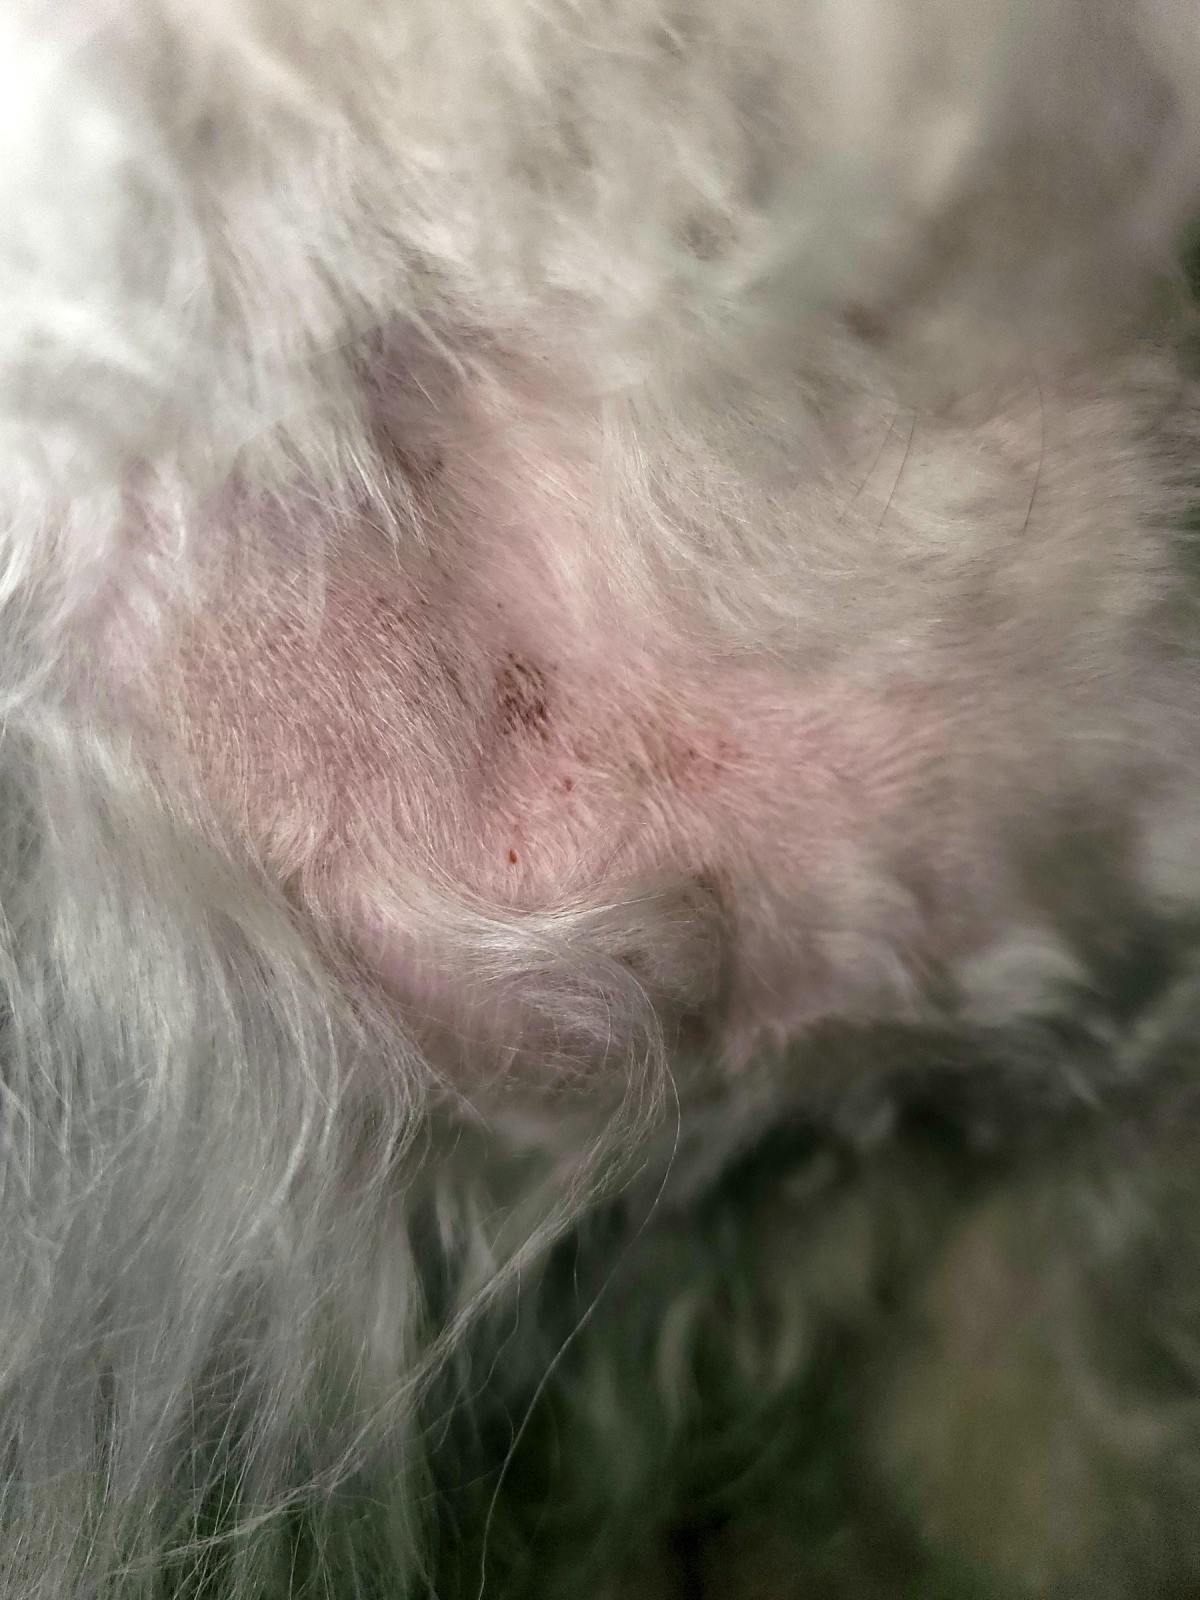 Top Dog Skin Irritation After Grooming in the world Don t miss out 